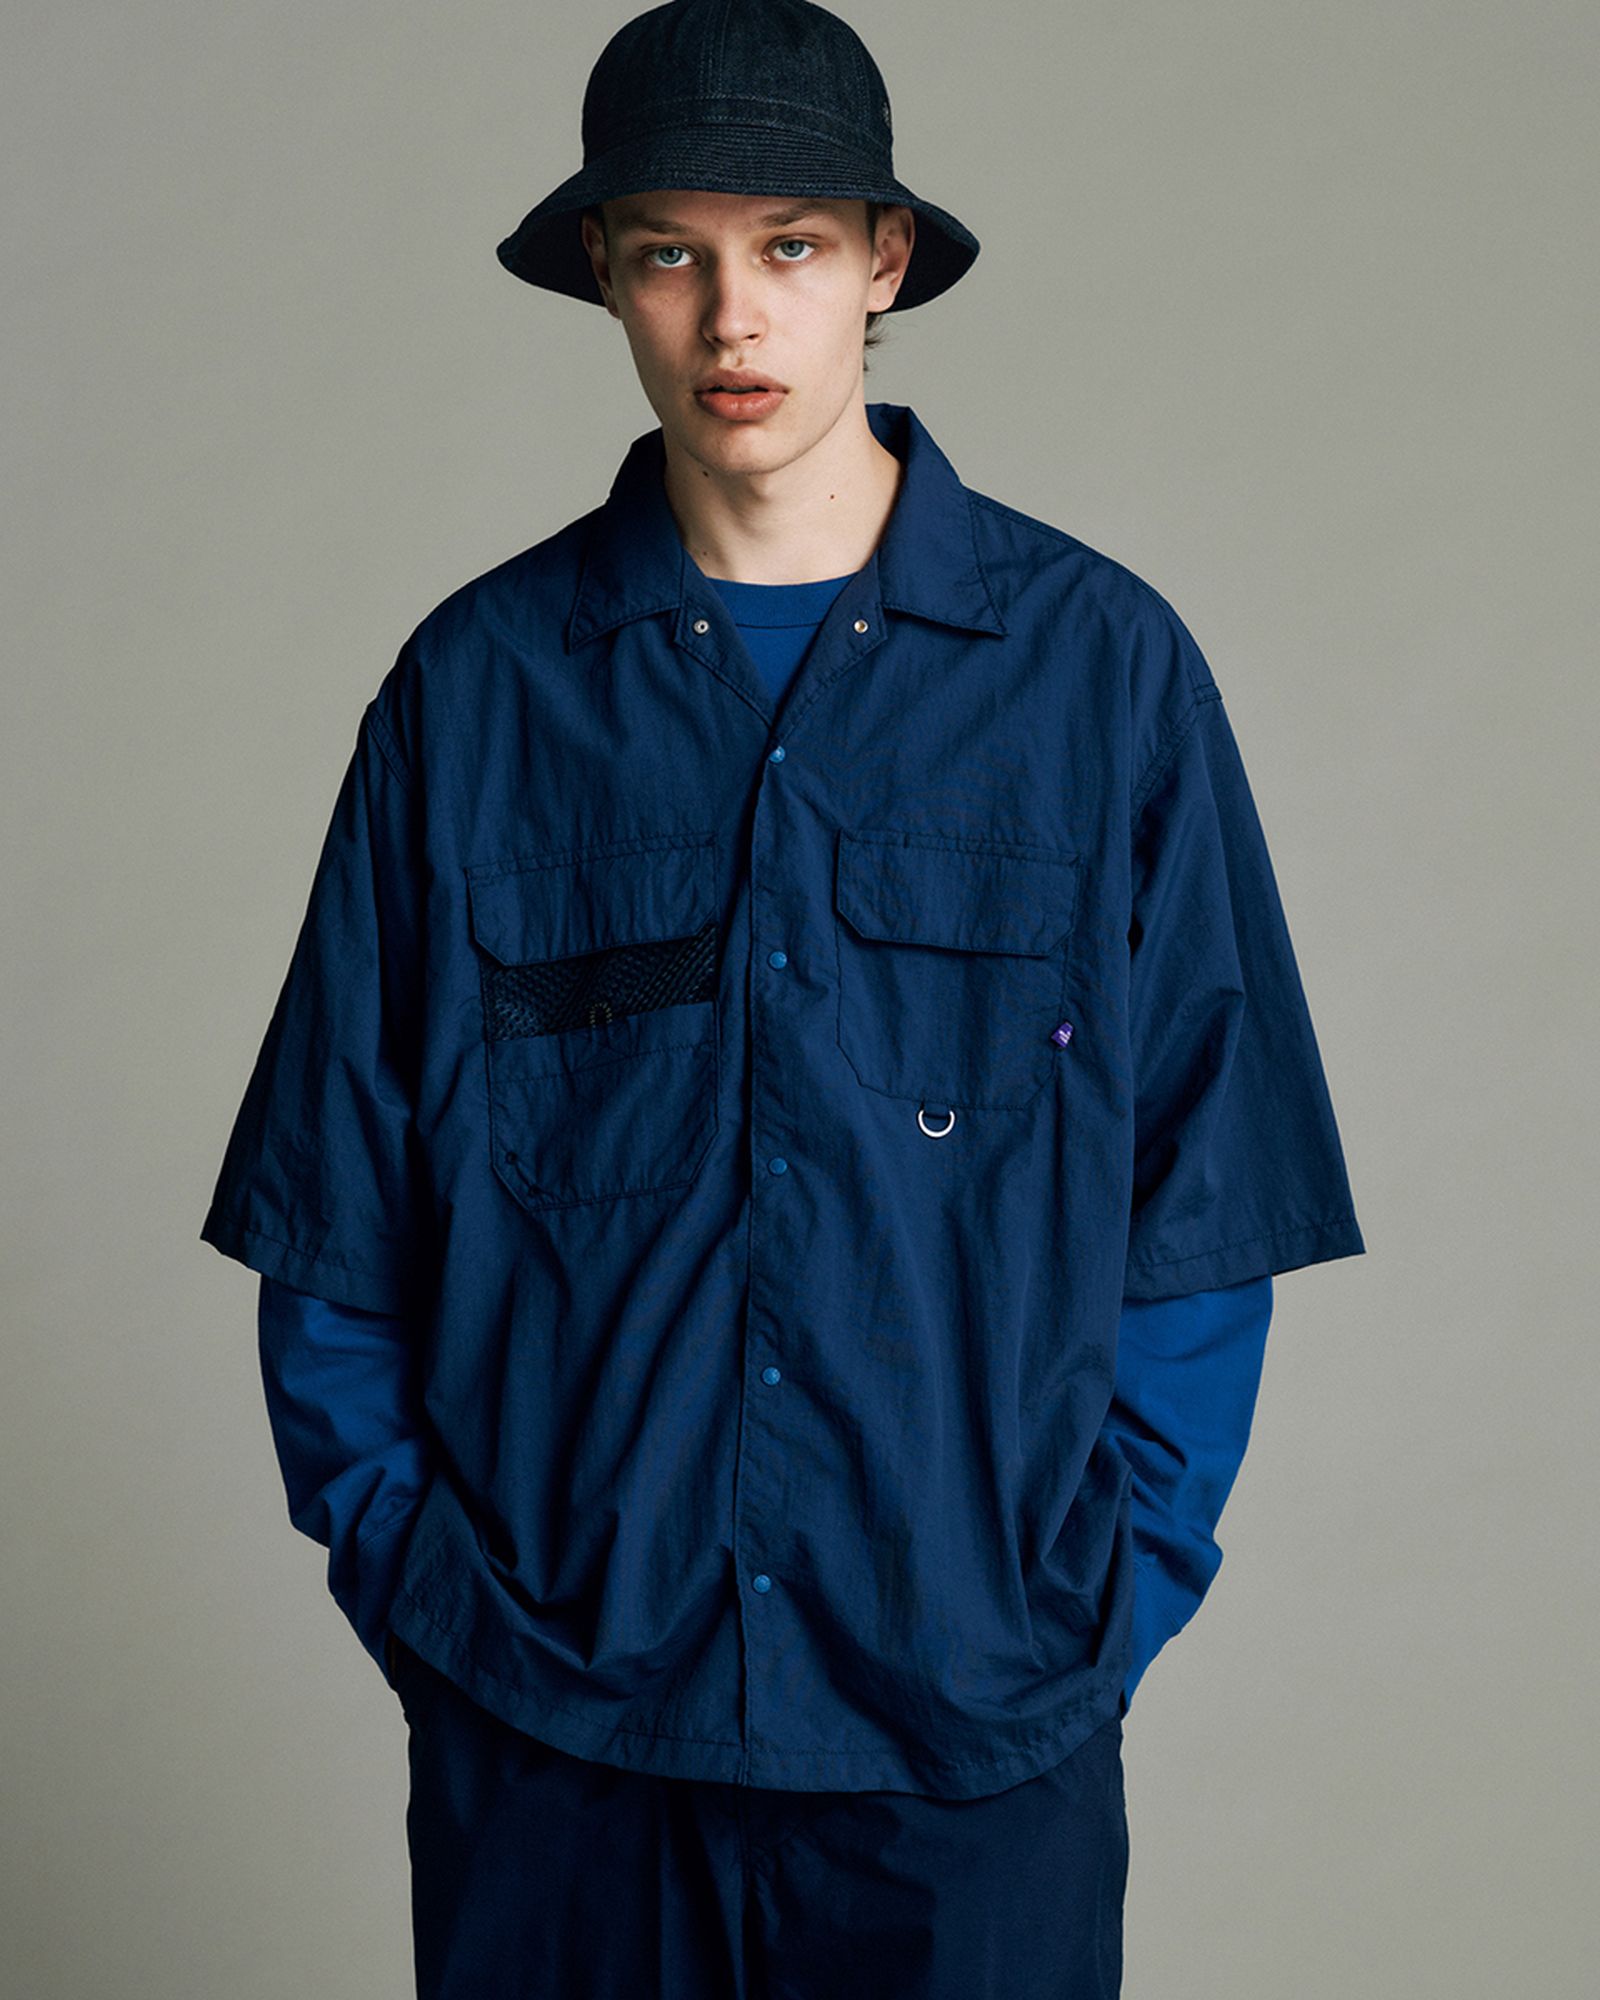 The North Face Purple Label SS22 Collection, Lookbook